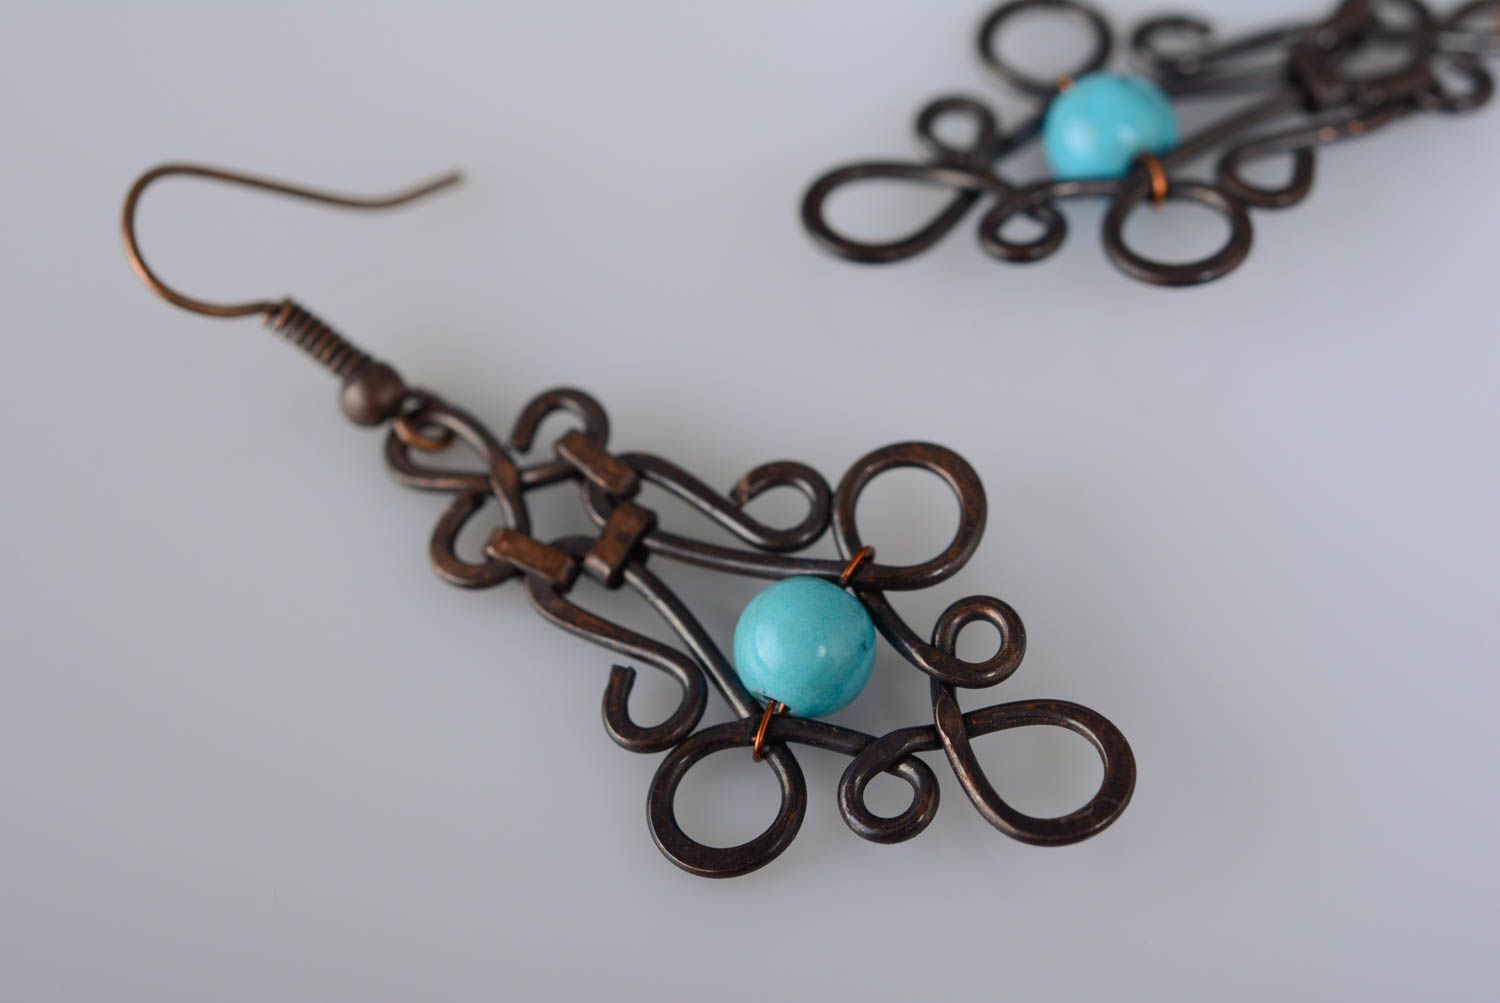 Massive earrings made of copper using wire wrap technique with artificial turquoise photo 2